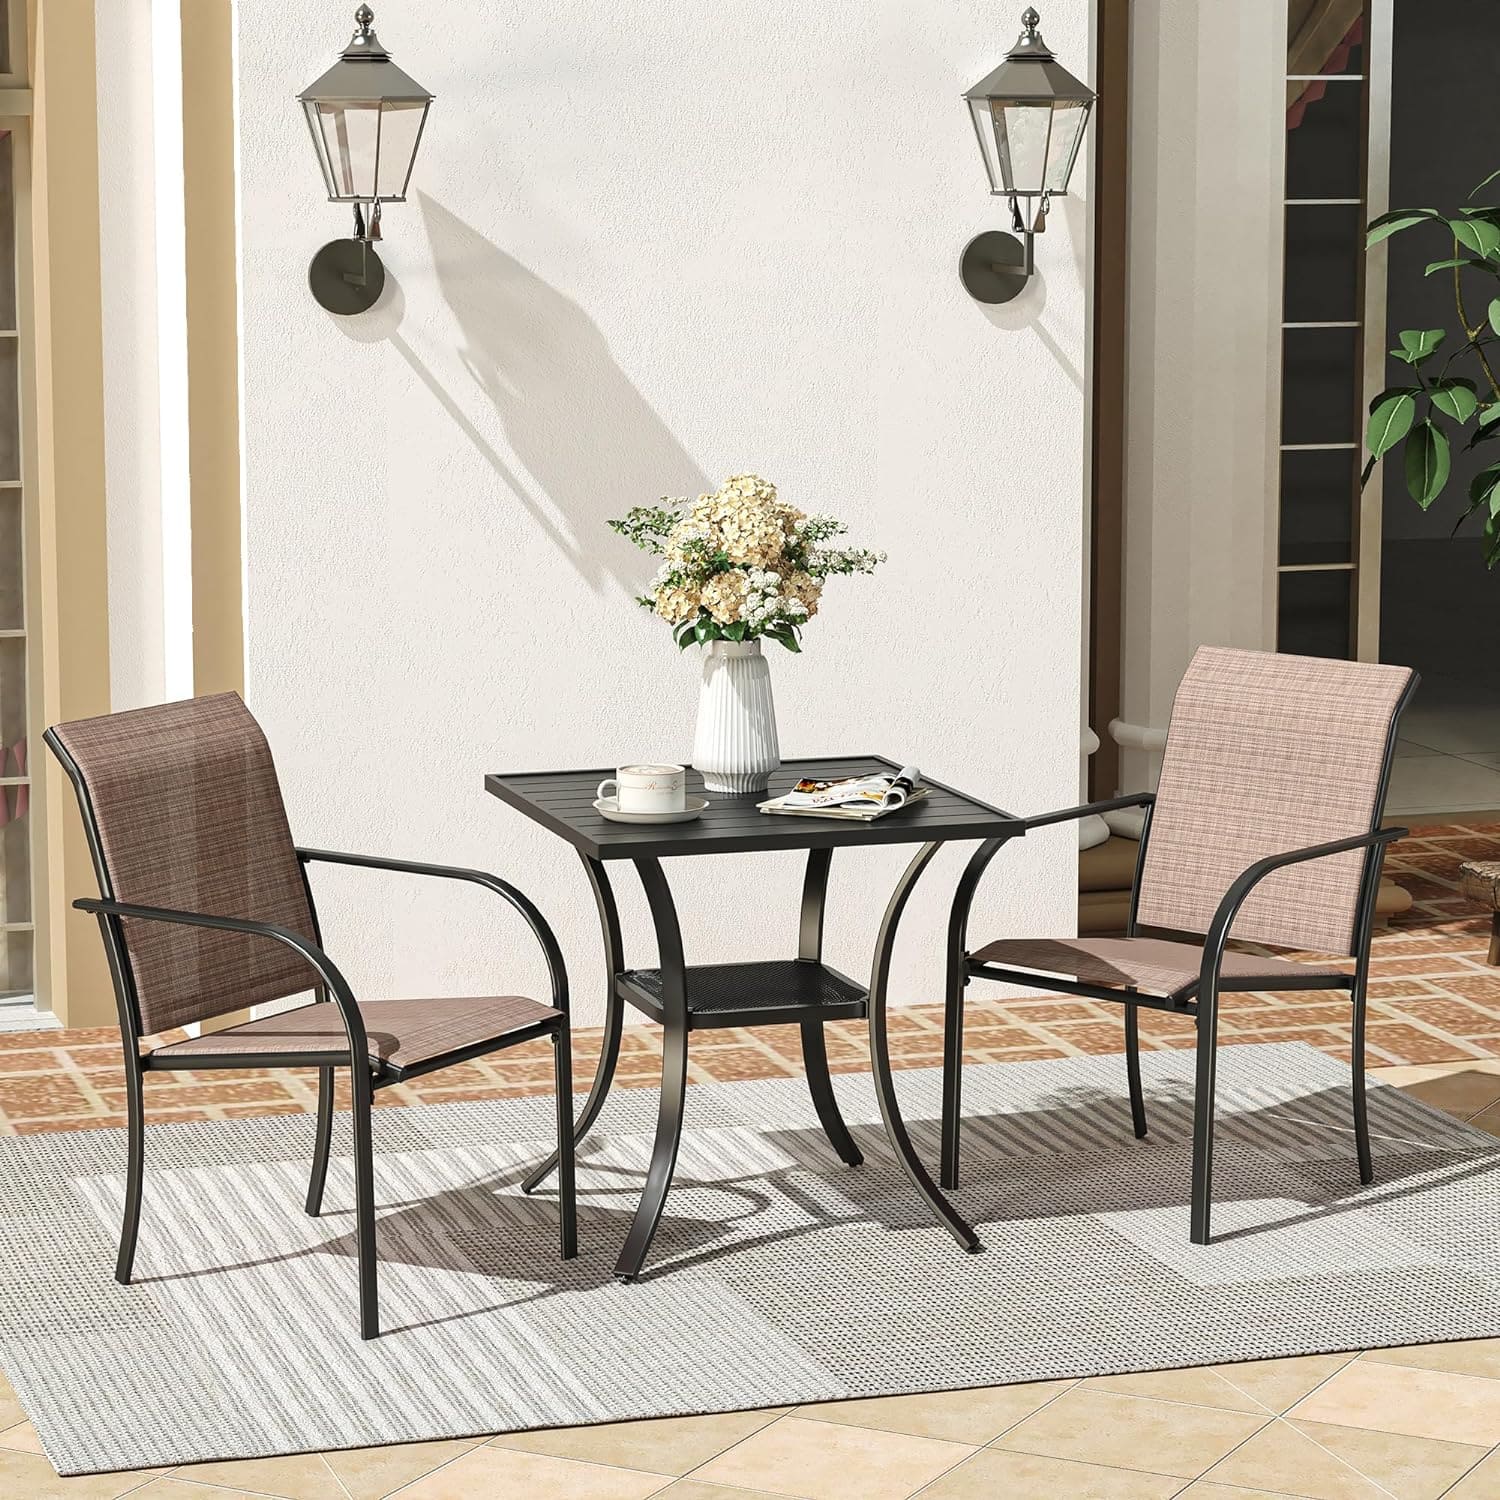 Vicllax 3-Piece Patio Bistro Set, Outdoor Stackable Sling Chairs and Square Bisto Table